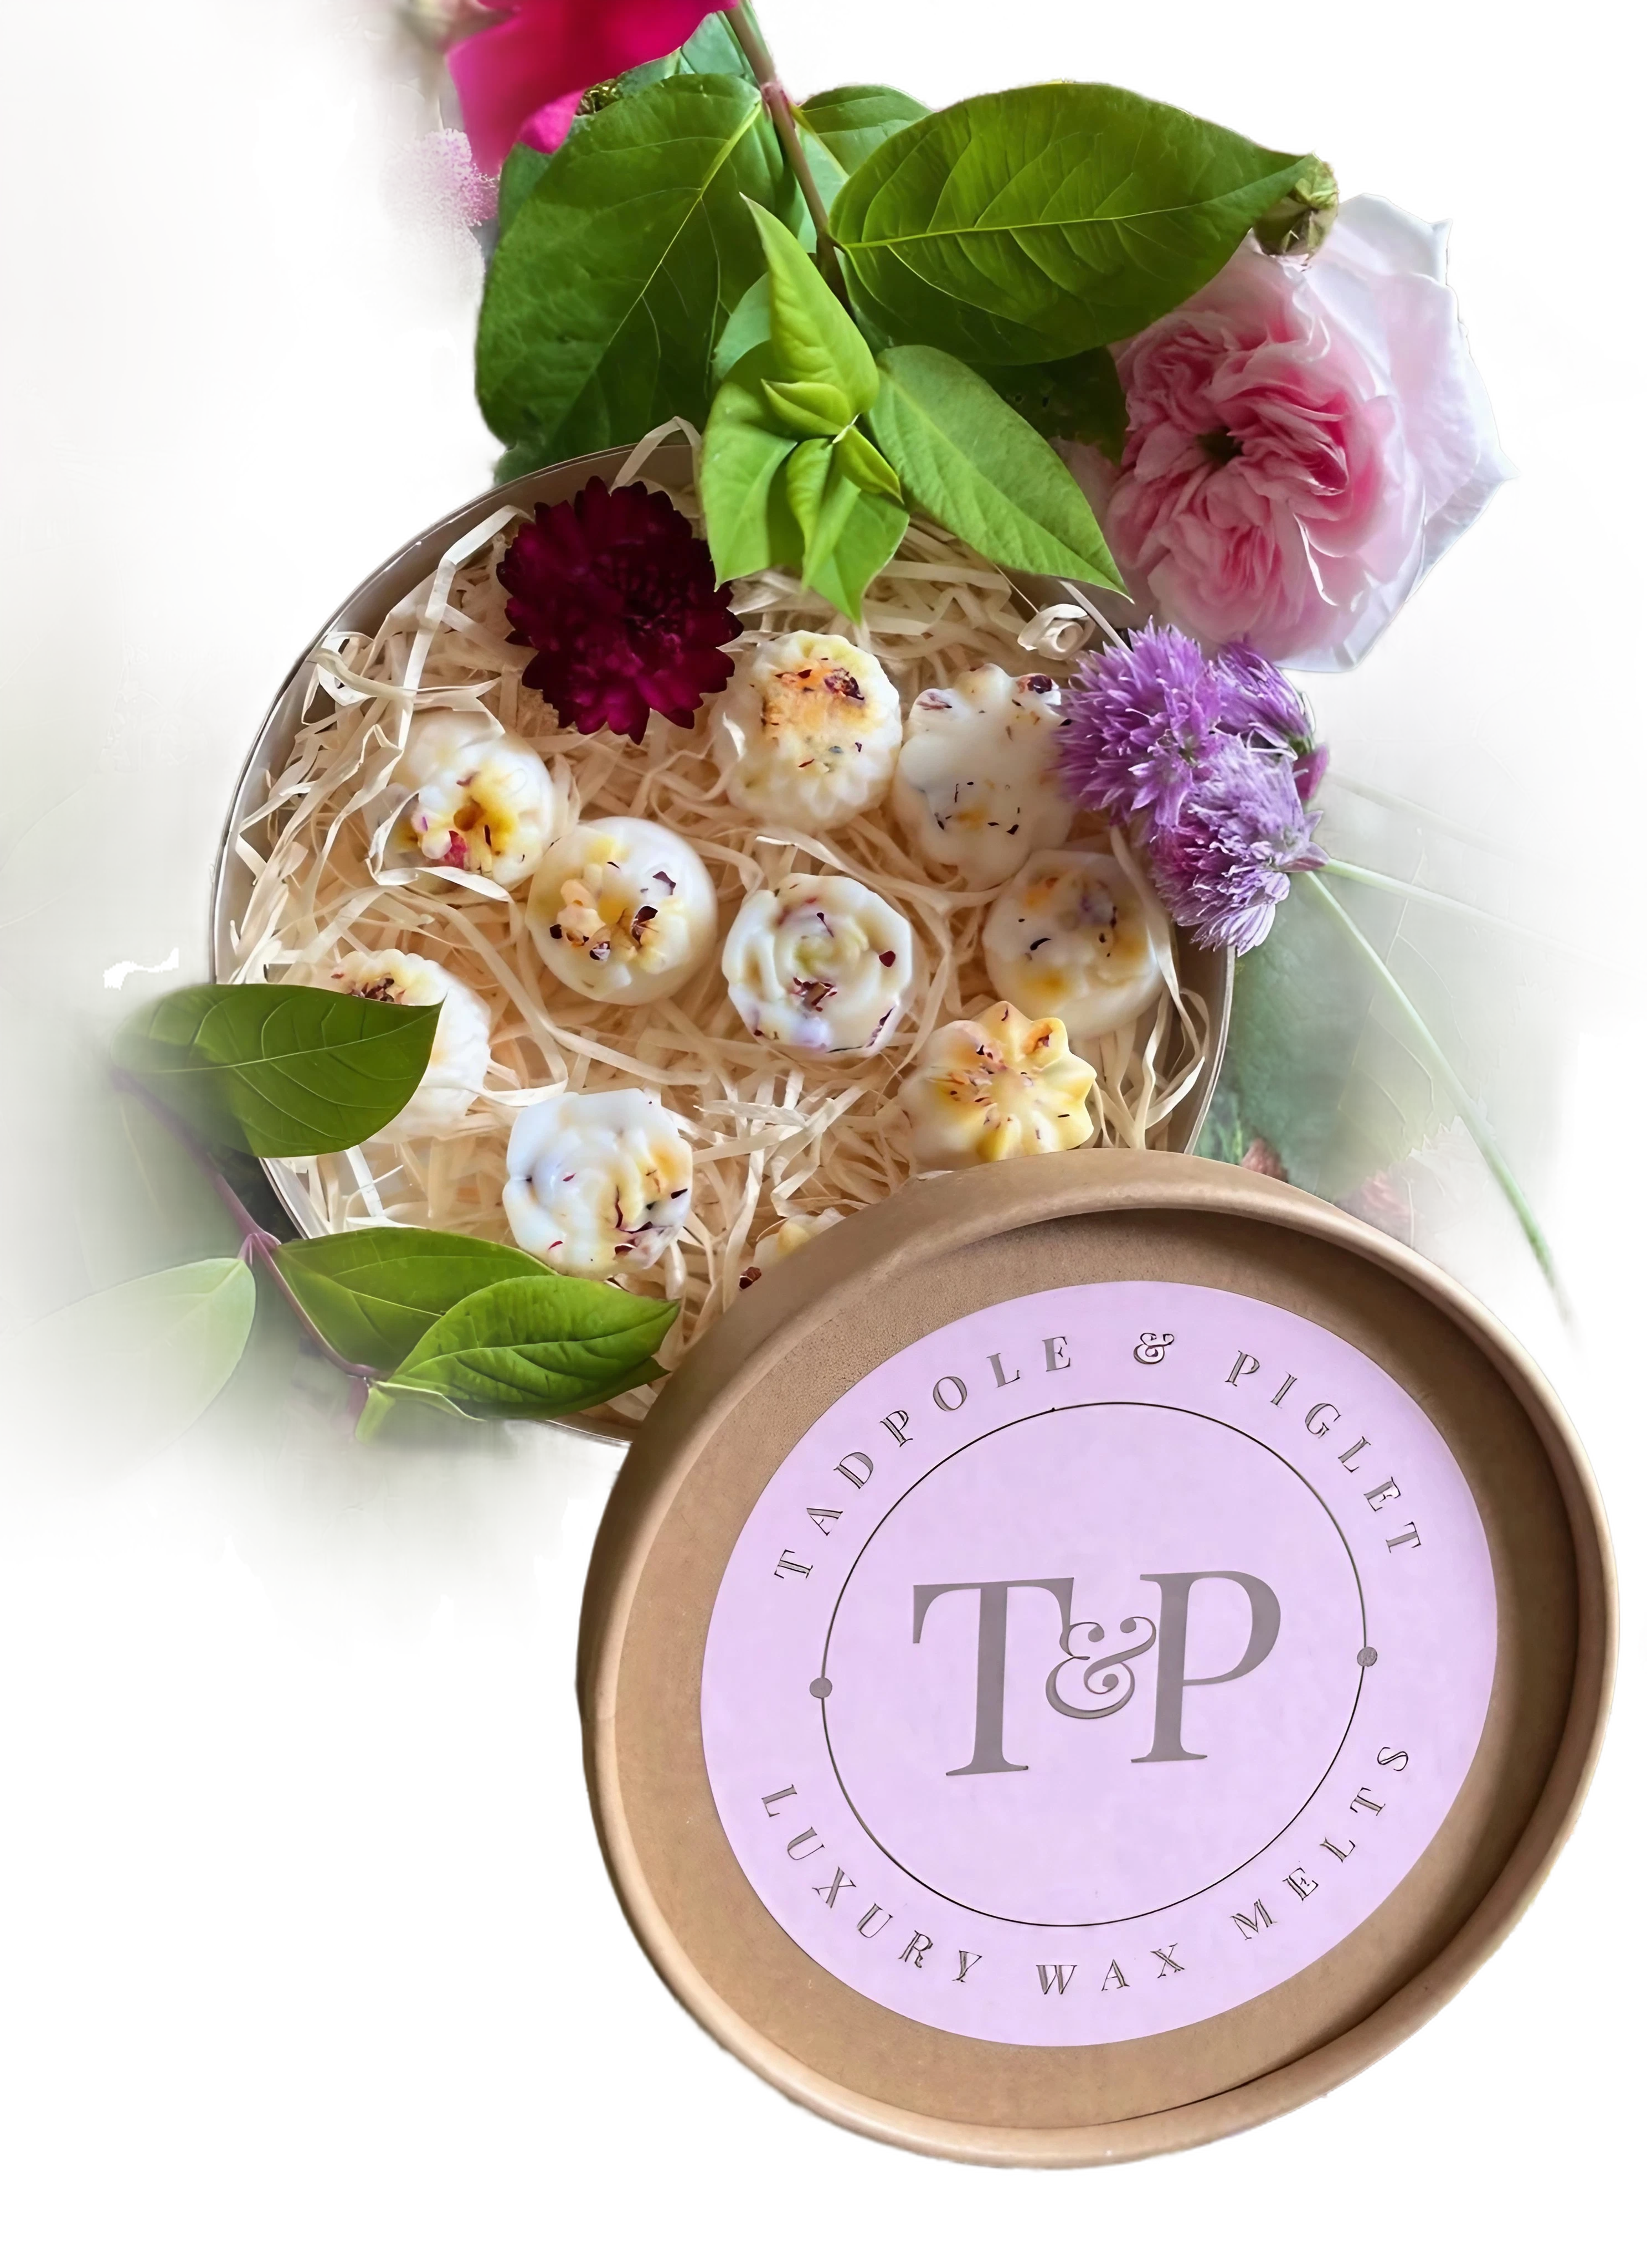 Cottage Garden Botanical Wax Melts in a pink box with a branded label